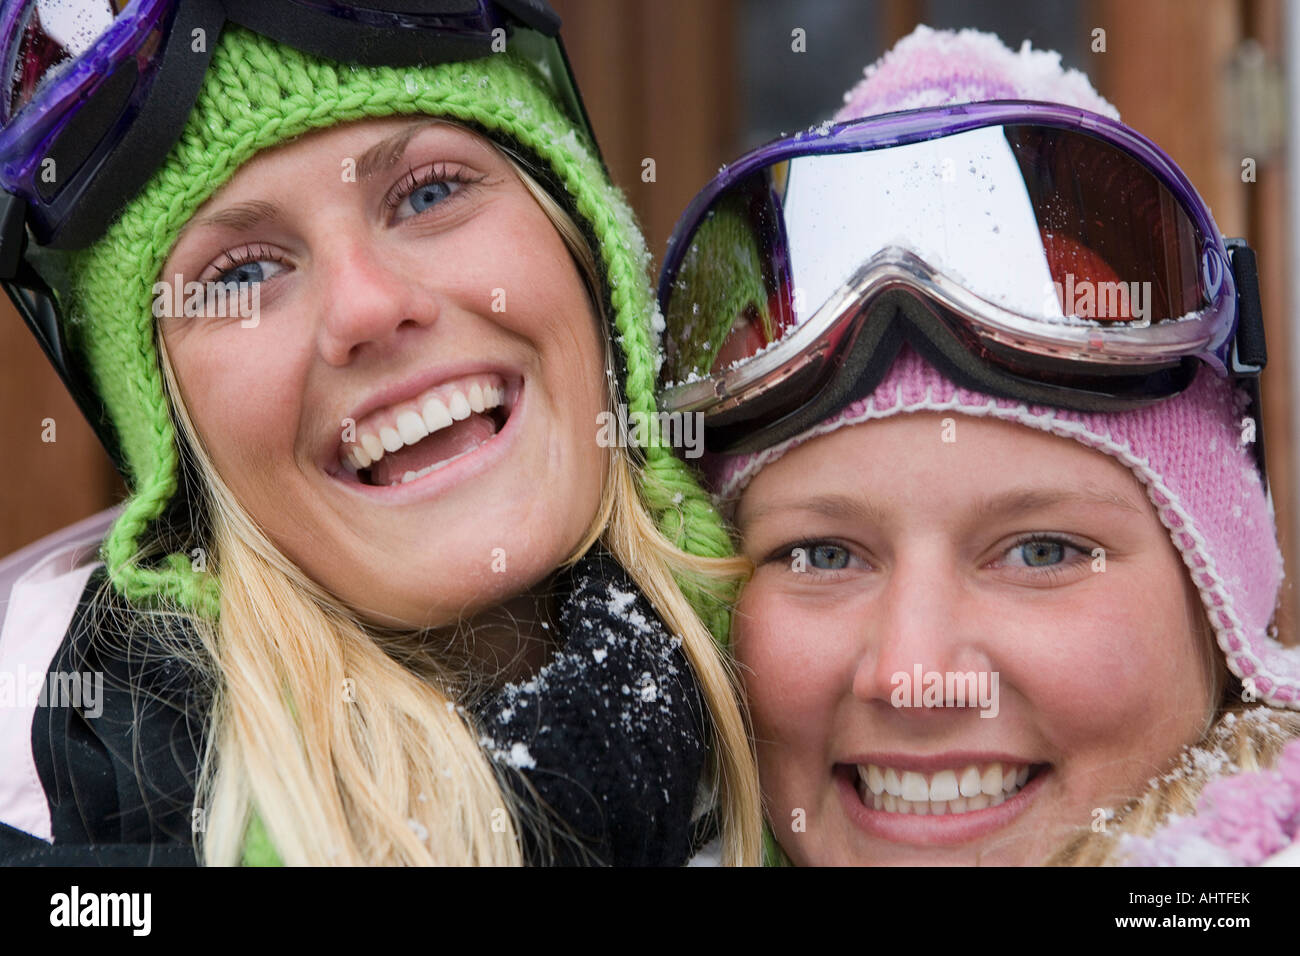 Two young blonde women in ski-wear, close-up, portrait Stock Photo